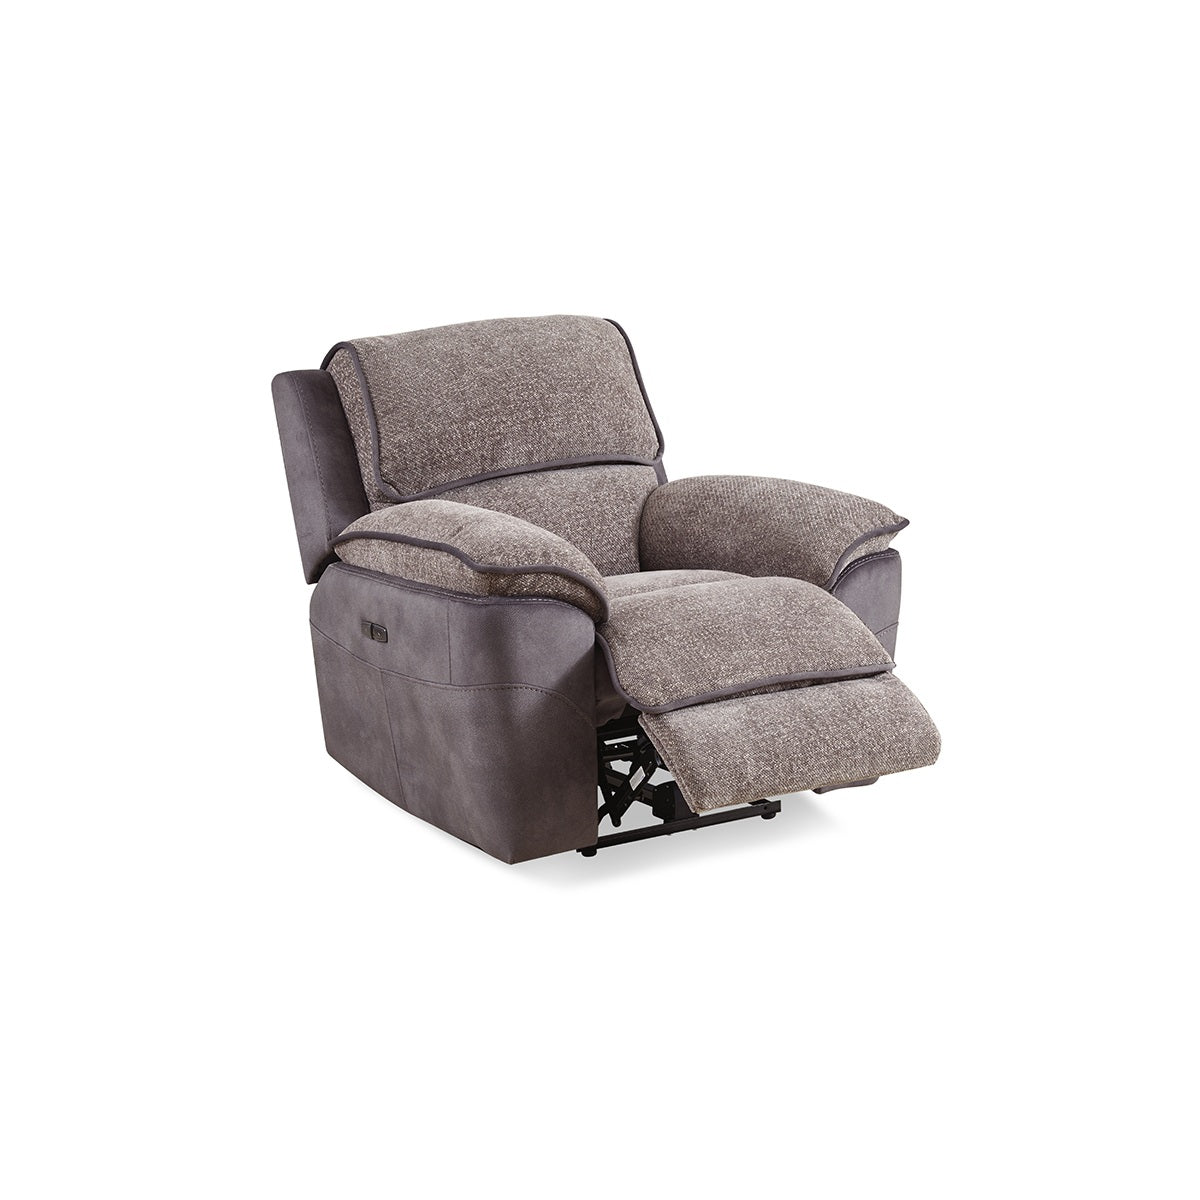 Vandelay Power Reclining Chair - Grey and Brown